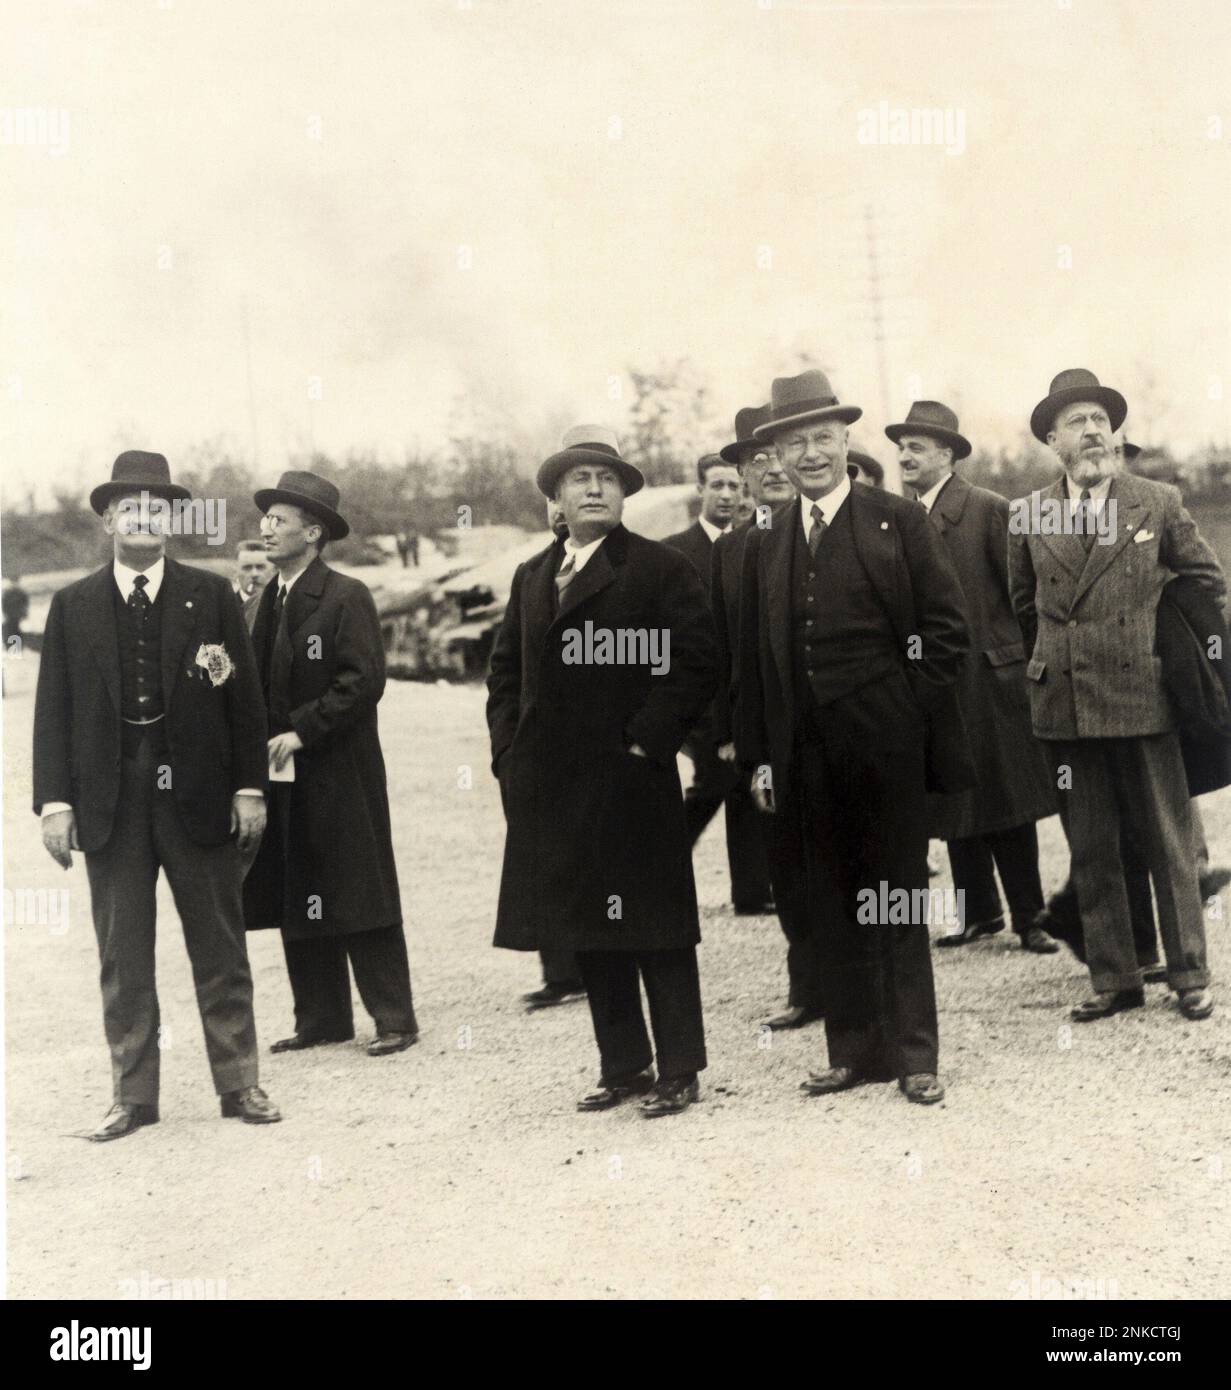 1932 , november , TORINO , ITALY  : The founder of italian FIAT car factory Giovanni AGNELLI ( 1866 -1945 ) meet the fascist Duce dictator Benito MUSSOLINI for a new model Car FIAT exibition  . First from the left in this photo the fascist count COSTANZO CIANO ( 1876 - 1939 ), father of Galeazzo Ciano married with Edda Mussolini  daughter of the Duce .  - INDUSTRY - CAR - INDUSTRIALI - AUTOMOBILI -  F.I.A.T. - INDUSTRIA AUTOMOBILISTICA ITALIANA - WWII - SECONDA GUERRA MONDIALE - FASCIST - FASCISMO - AUTARCHIA ---  Archivio GBB Stock Photo